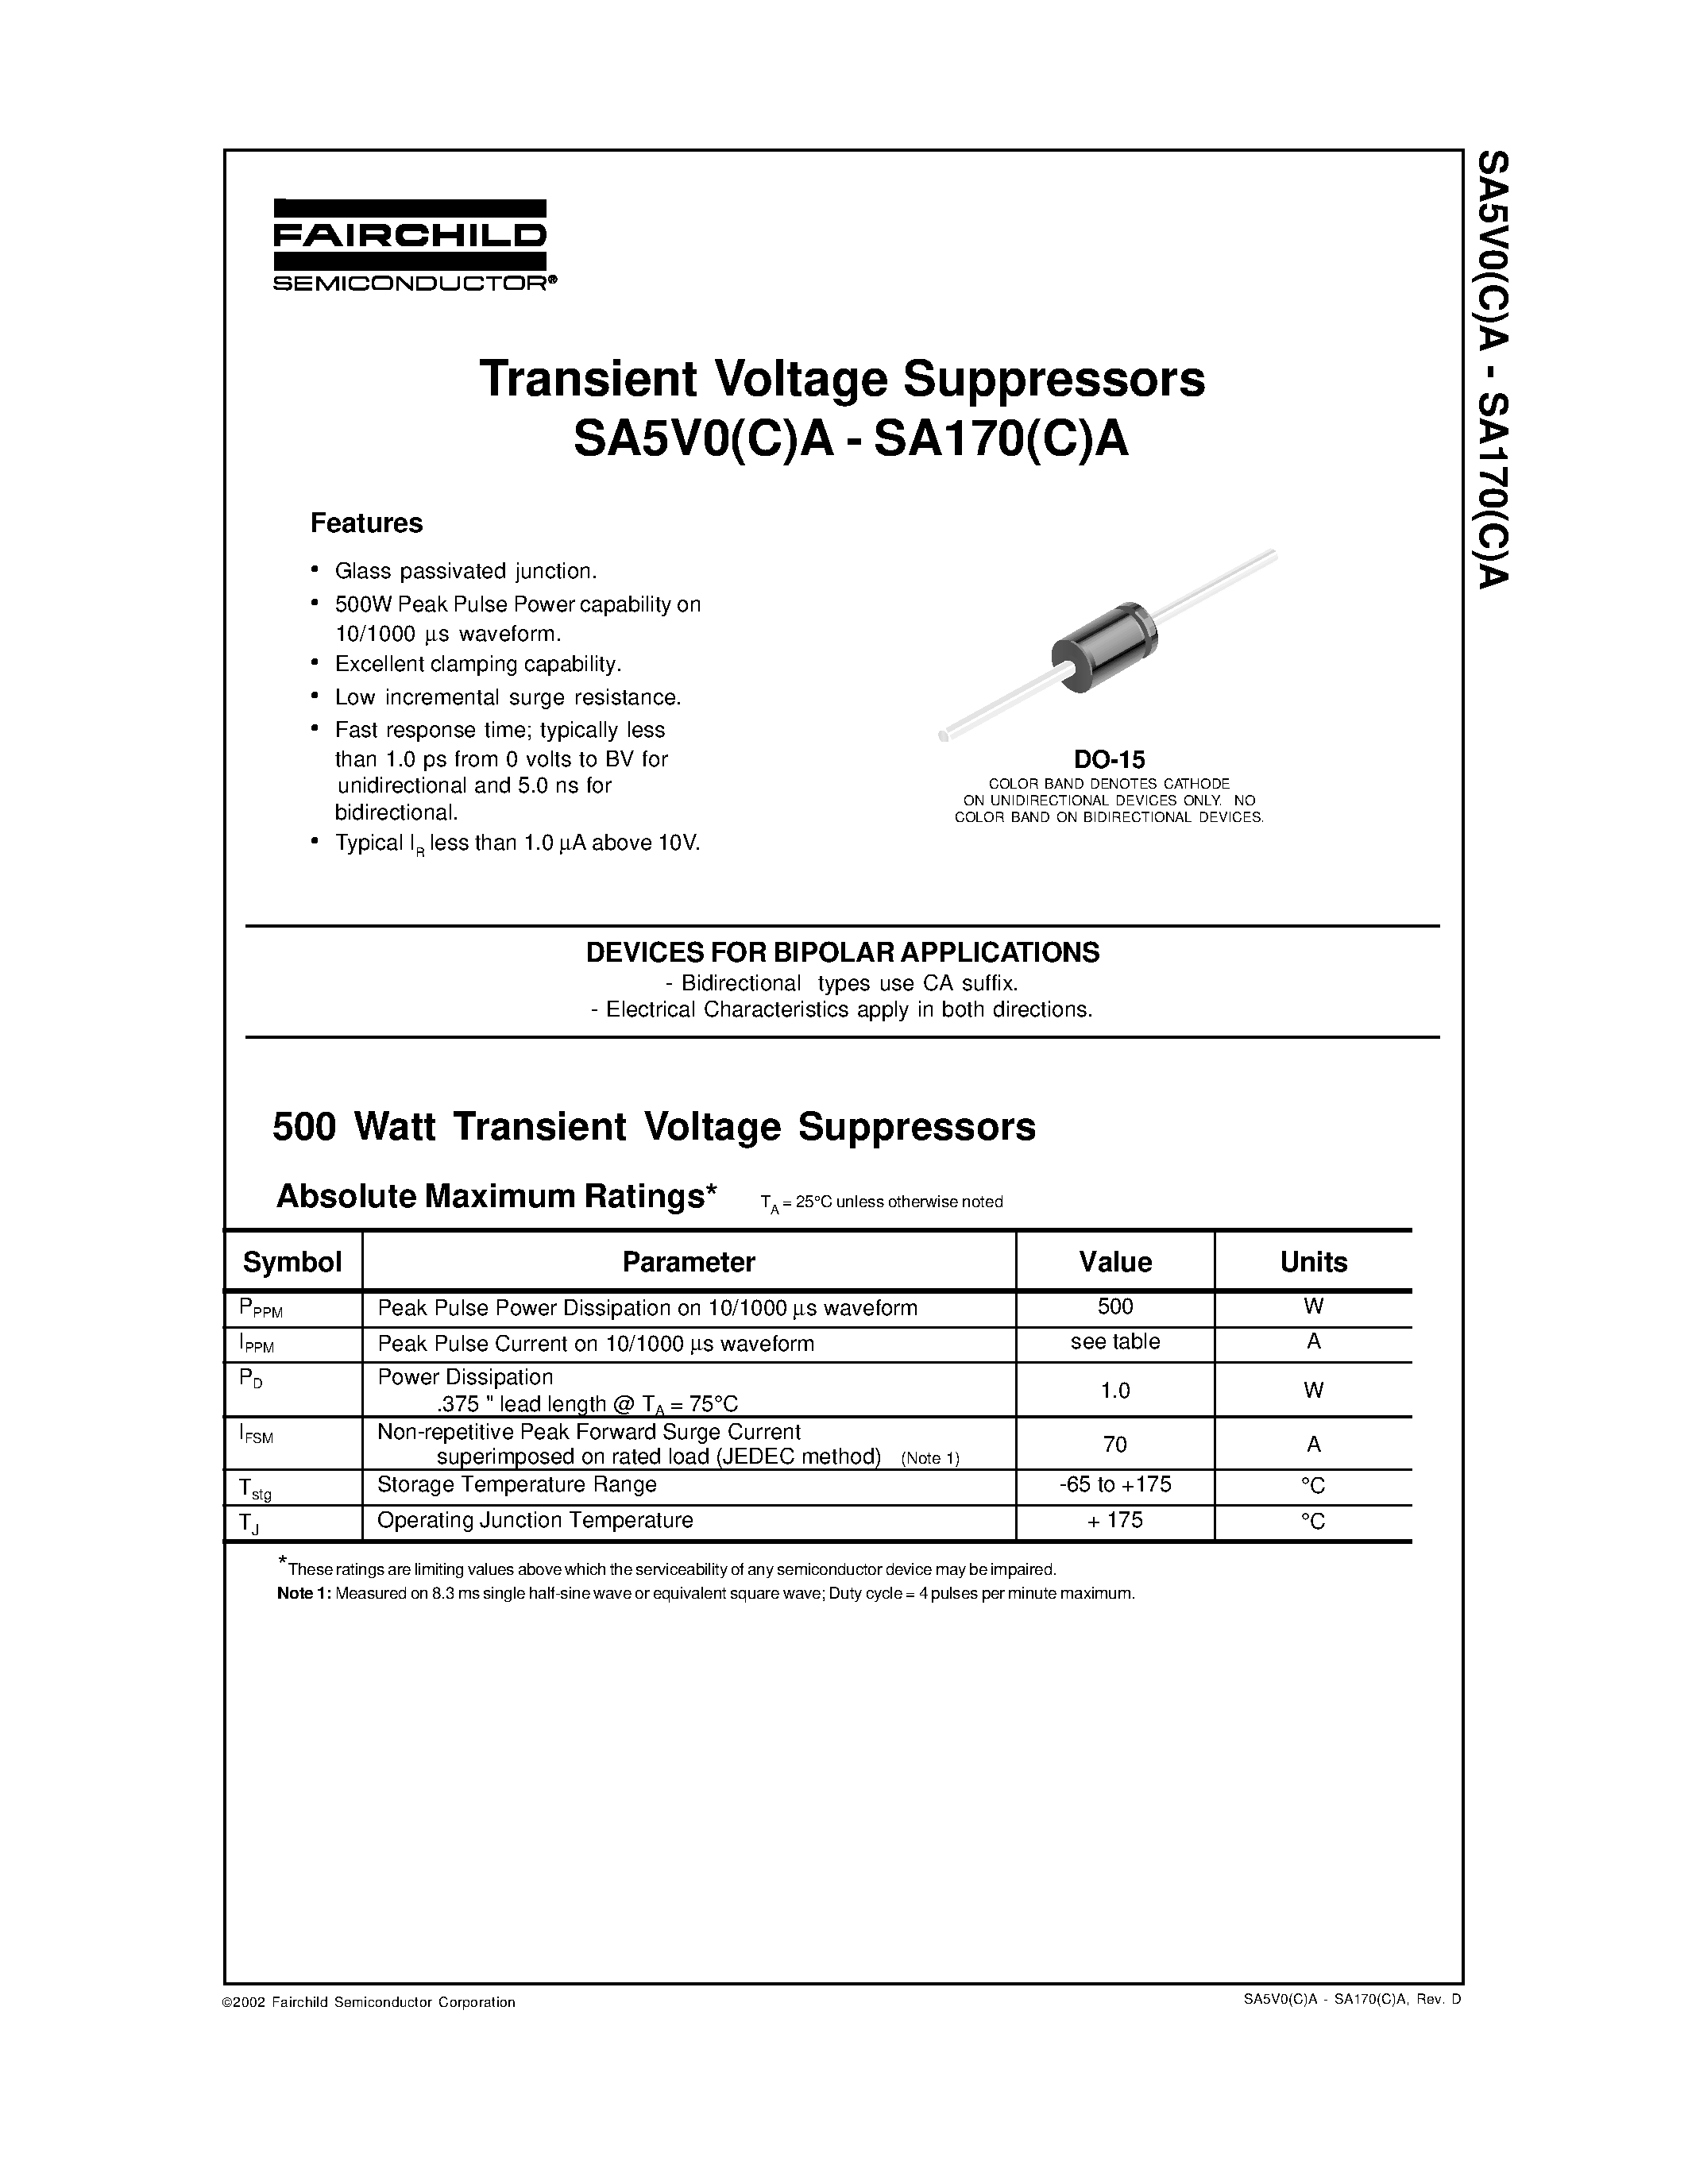 Datasheet SA28A - Transient Voltage Suppressors page 1